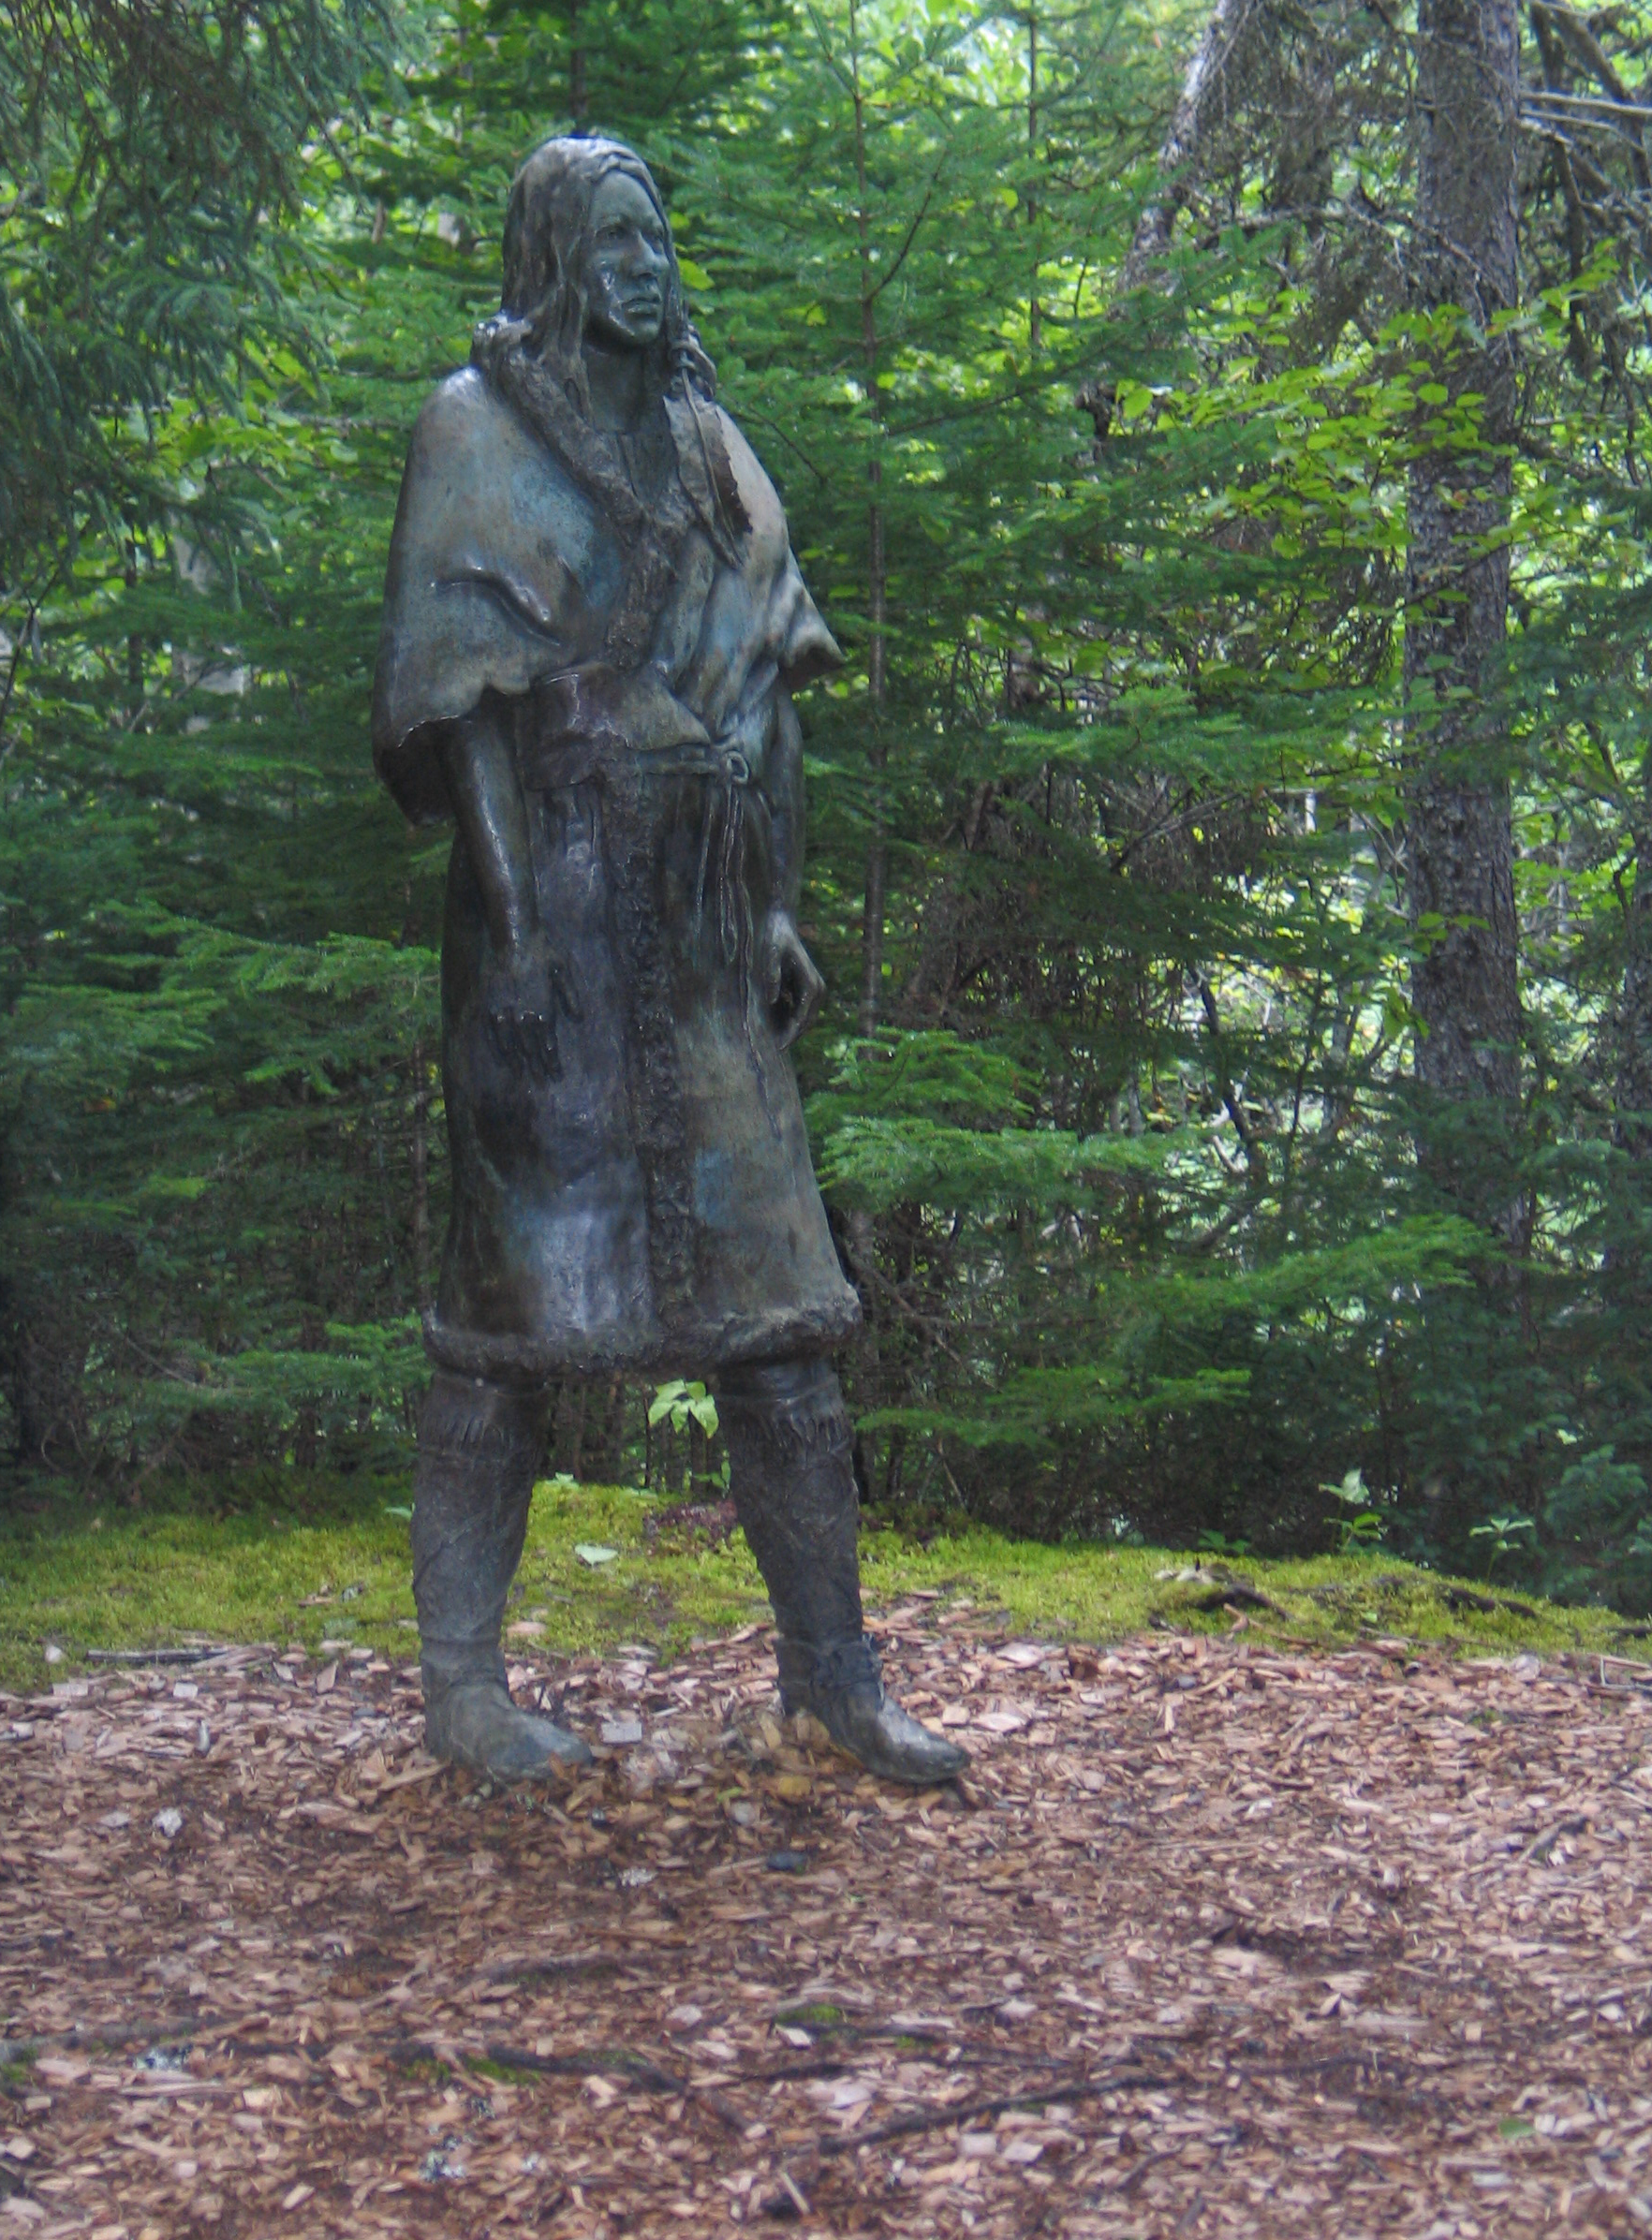 Statue of Beothuk woman in Boyd’s Cove. Photo by Ulli Diemer.